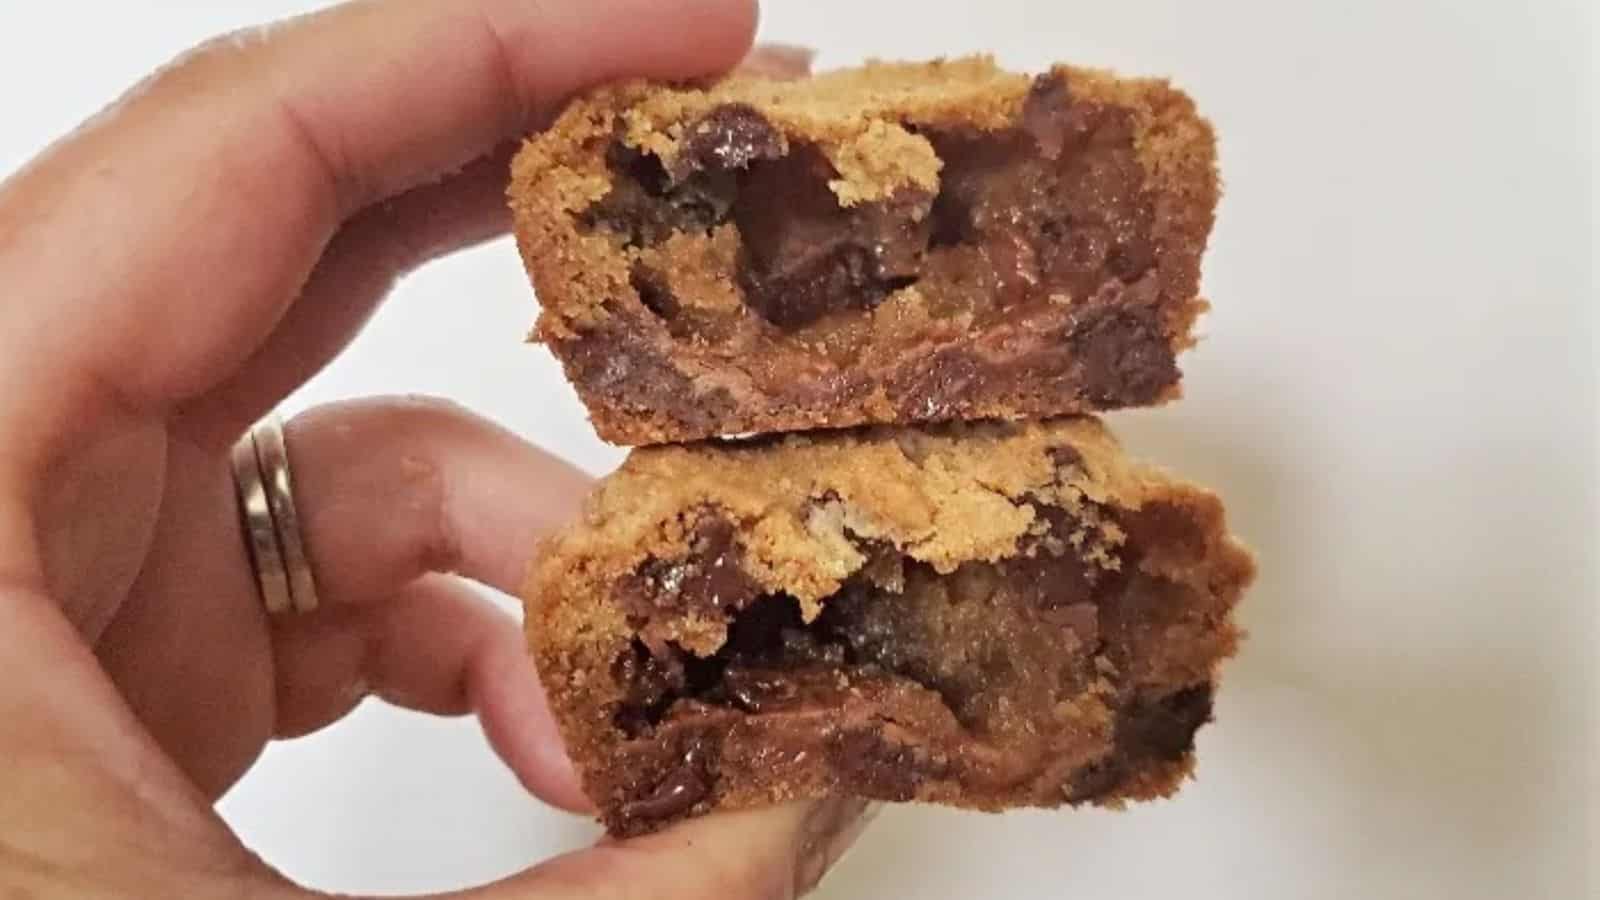 Image shows A person holding up two halves of candy bar stuffed cookies.